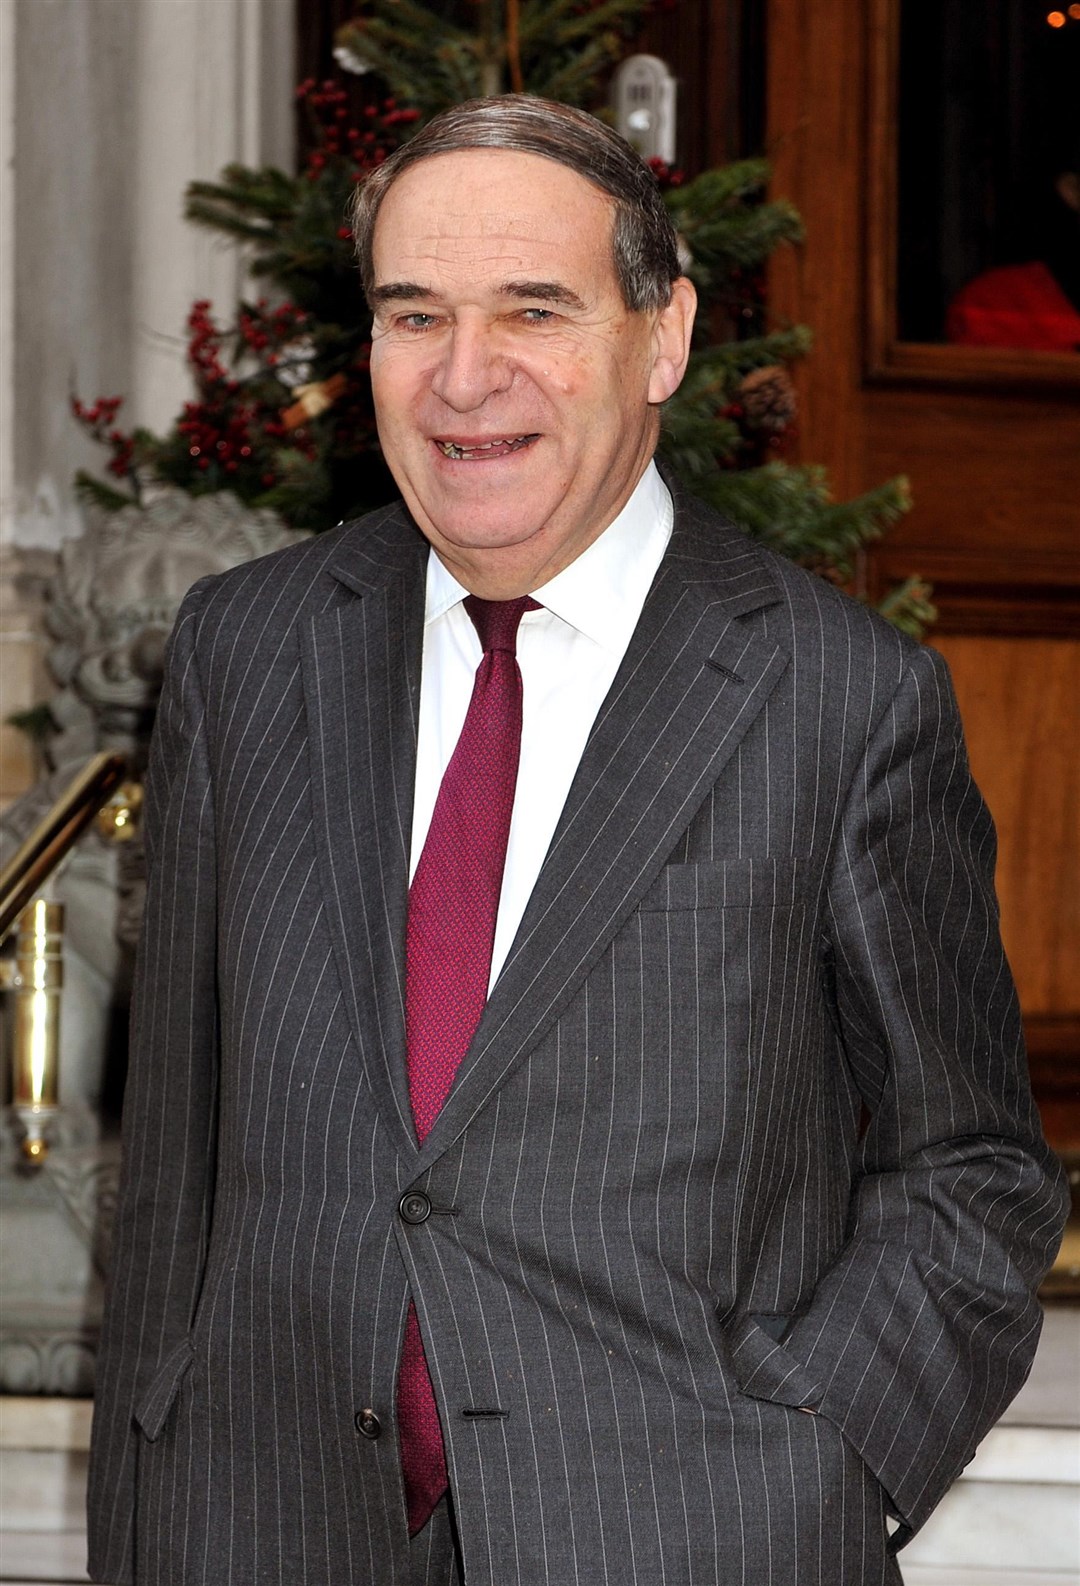 Leon Brittan, who was falsely accused by Carl Beech, died without knowing there was insufficient evidence to prosecute him (John Stillwell/PA)